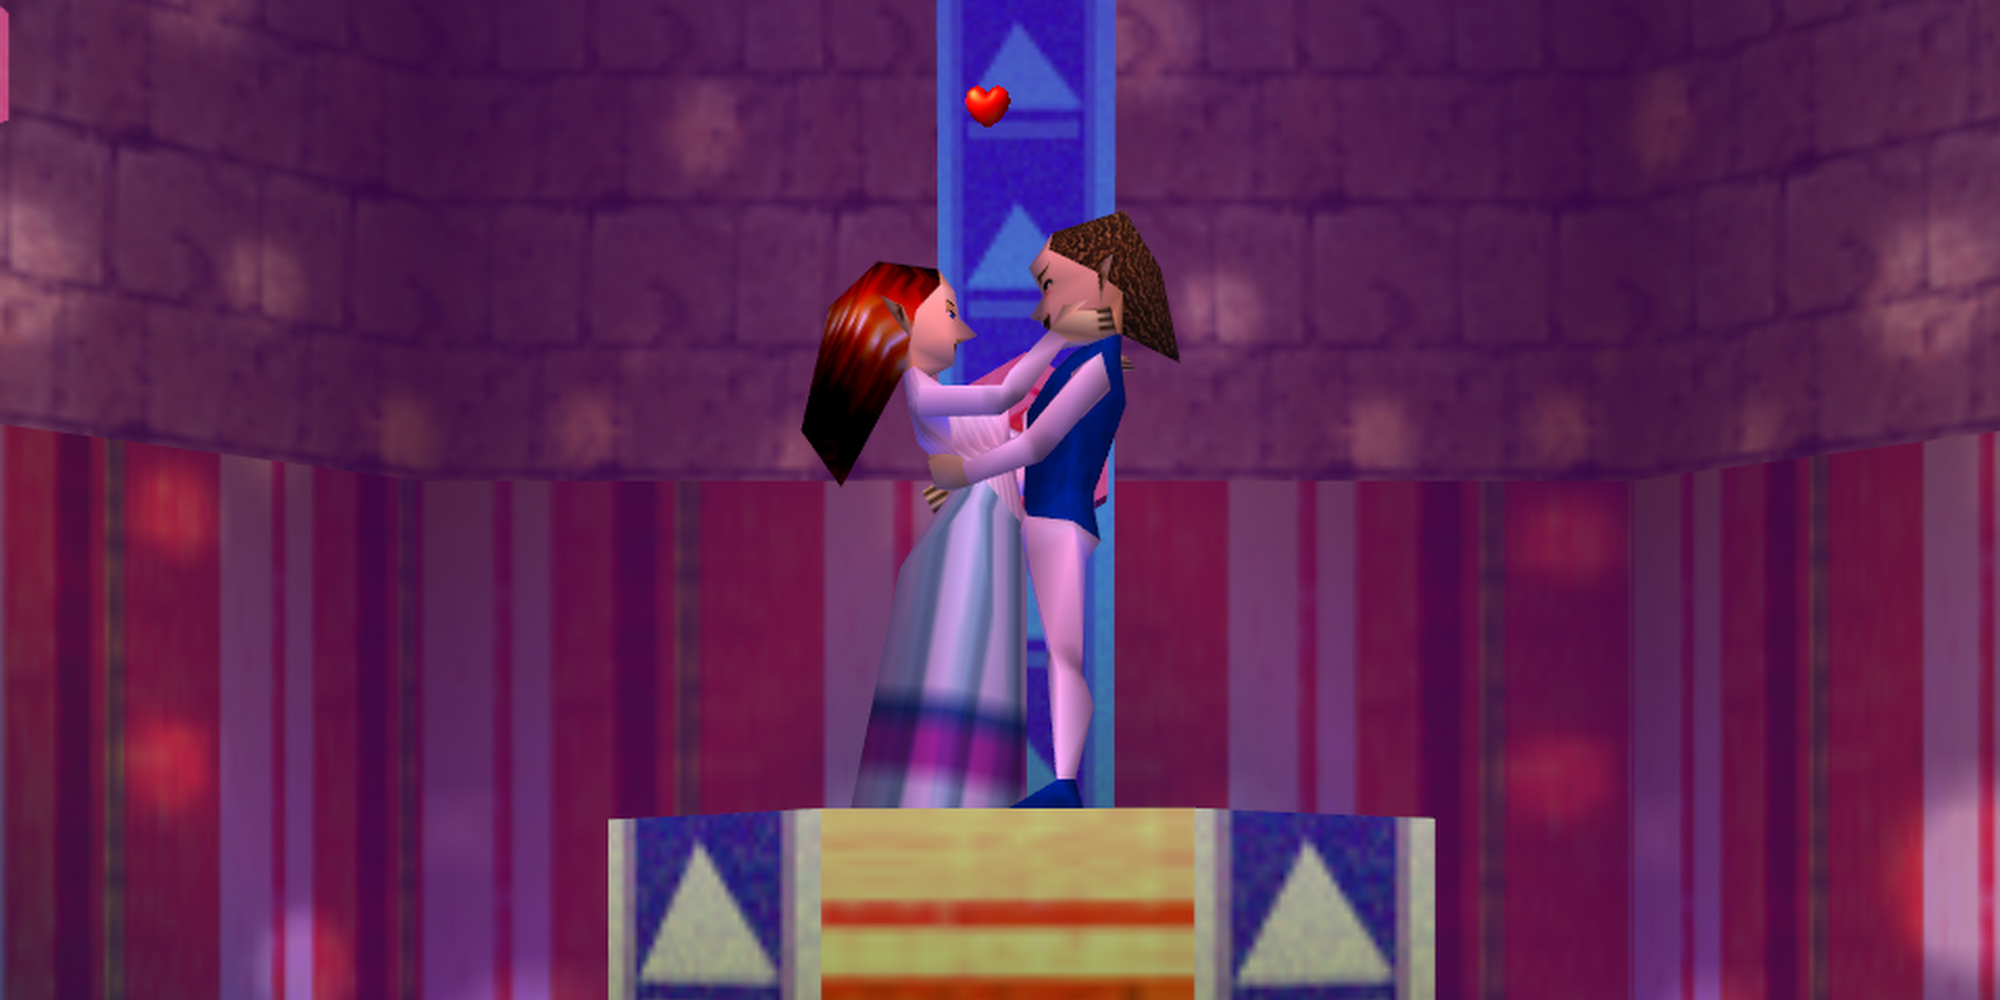 The Honey and Darling minigame from Majora's Mask. The couple stands in the middle of a very pink building.